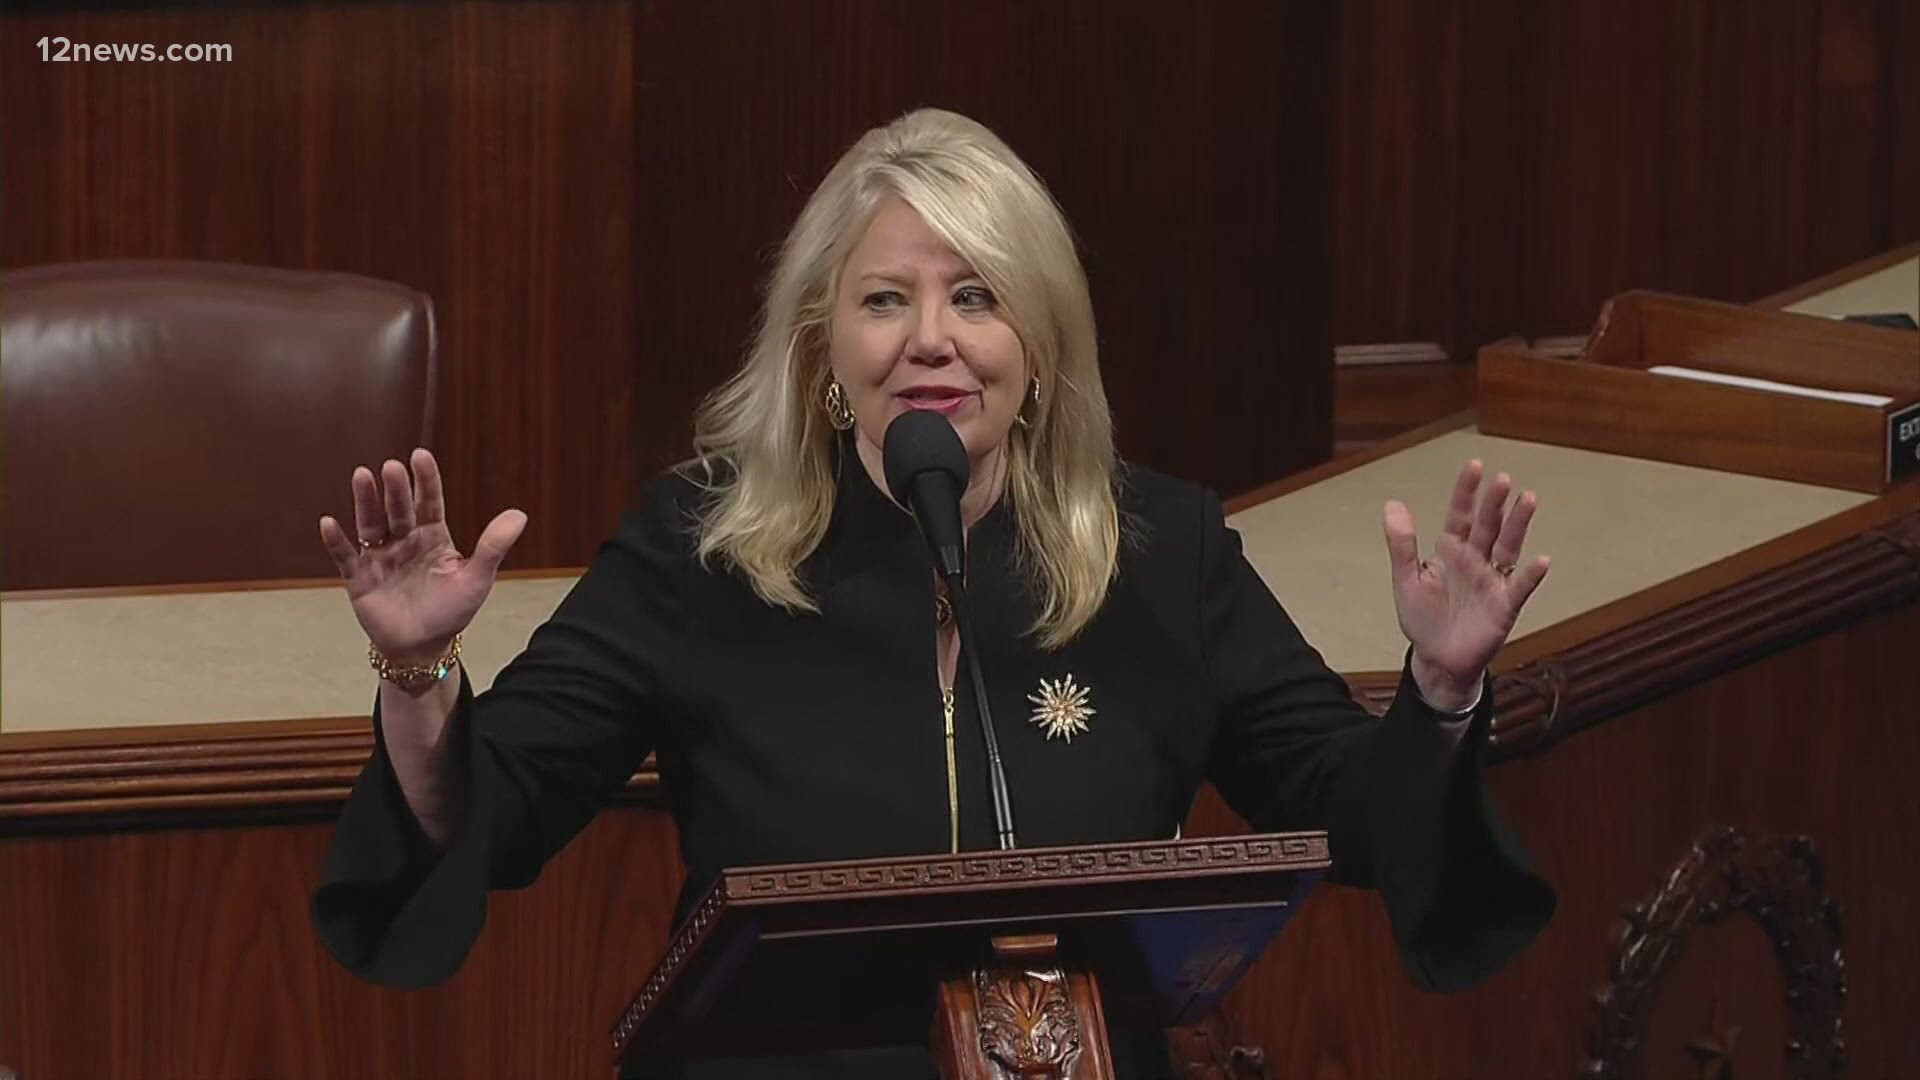 Rep. Debbie Lesko is says undocumented immigrants should go to the back of the line for COVID vaccines, while Americans should go first.